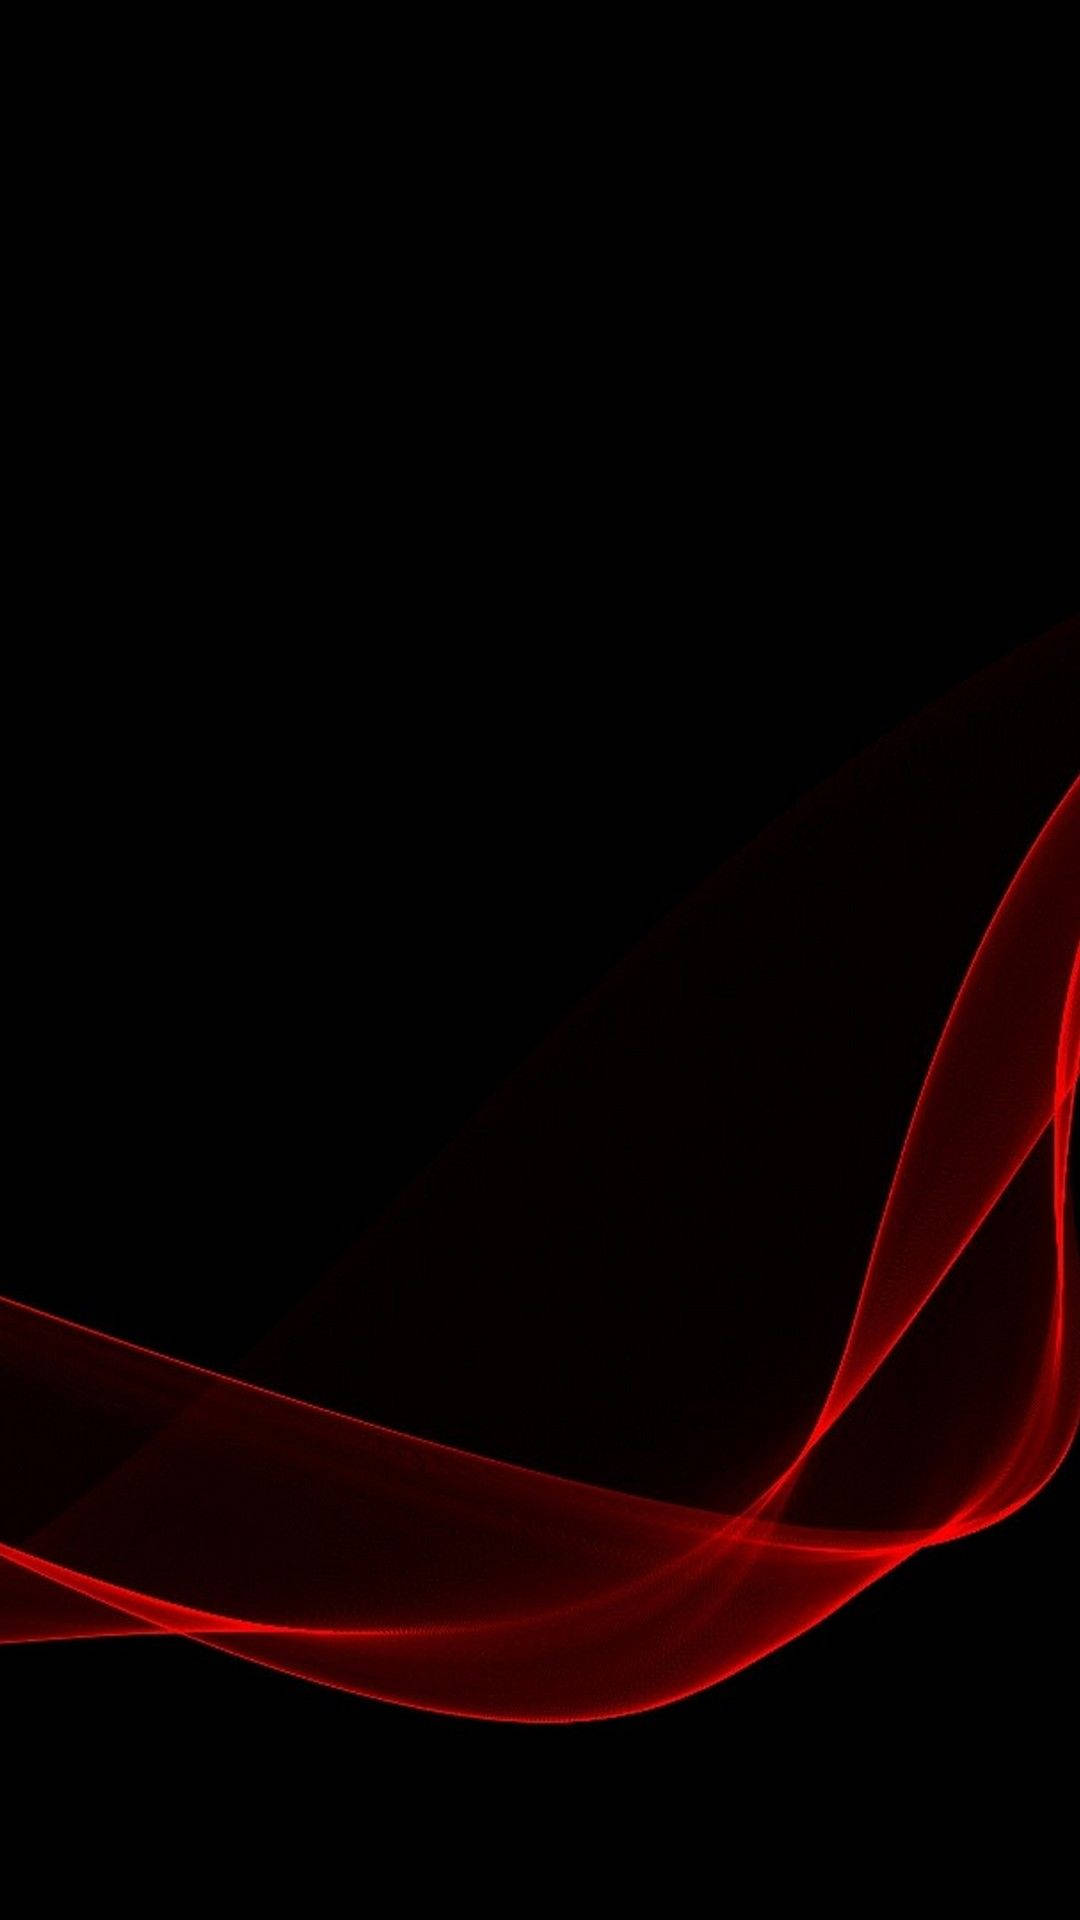 Black Android Glowing Red Light Background